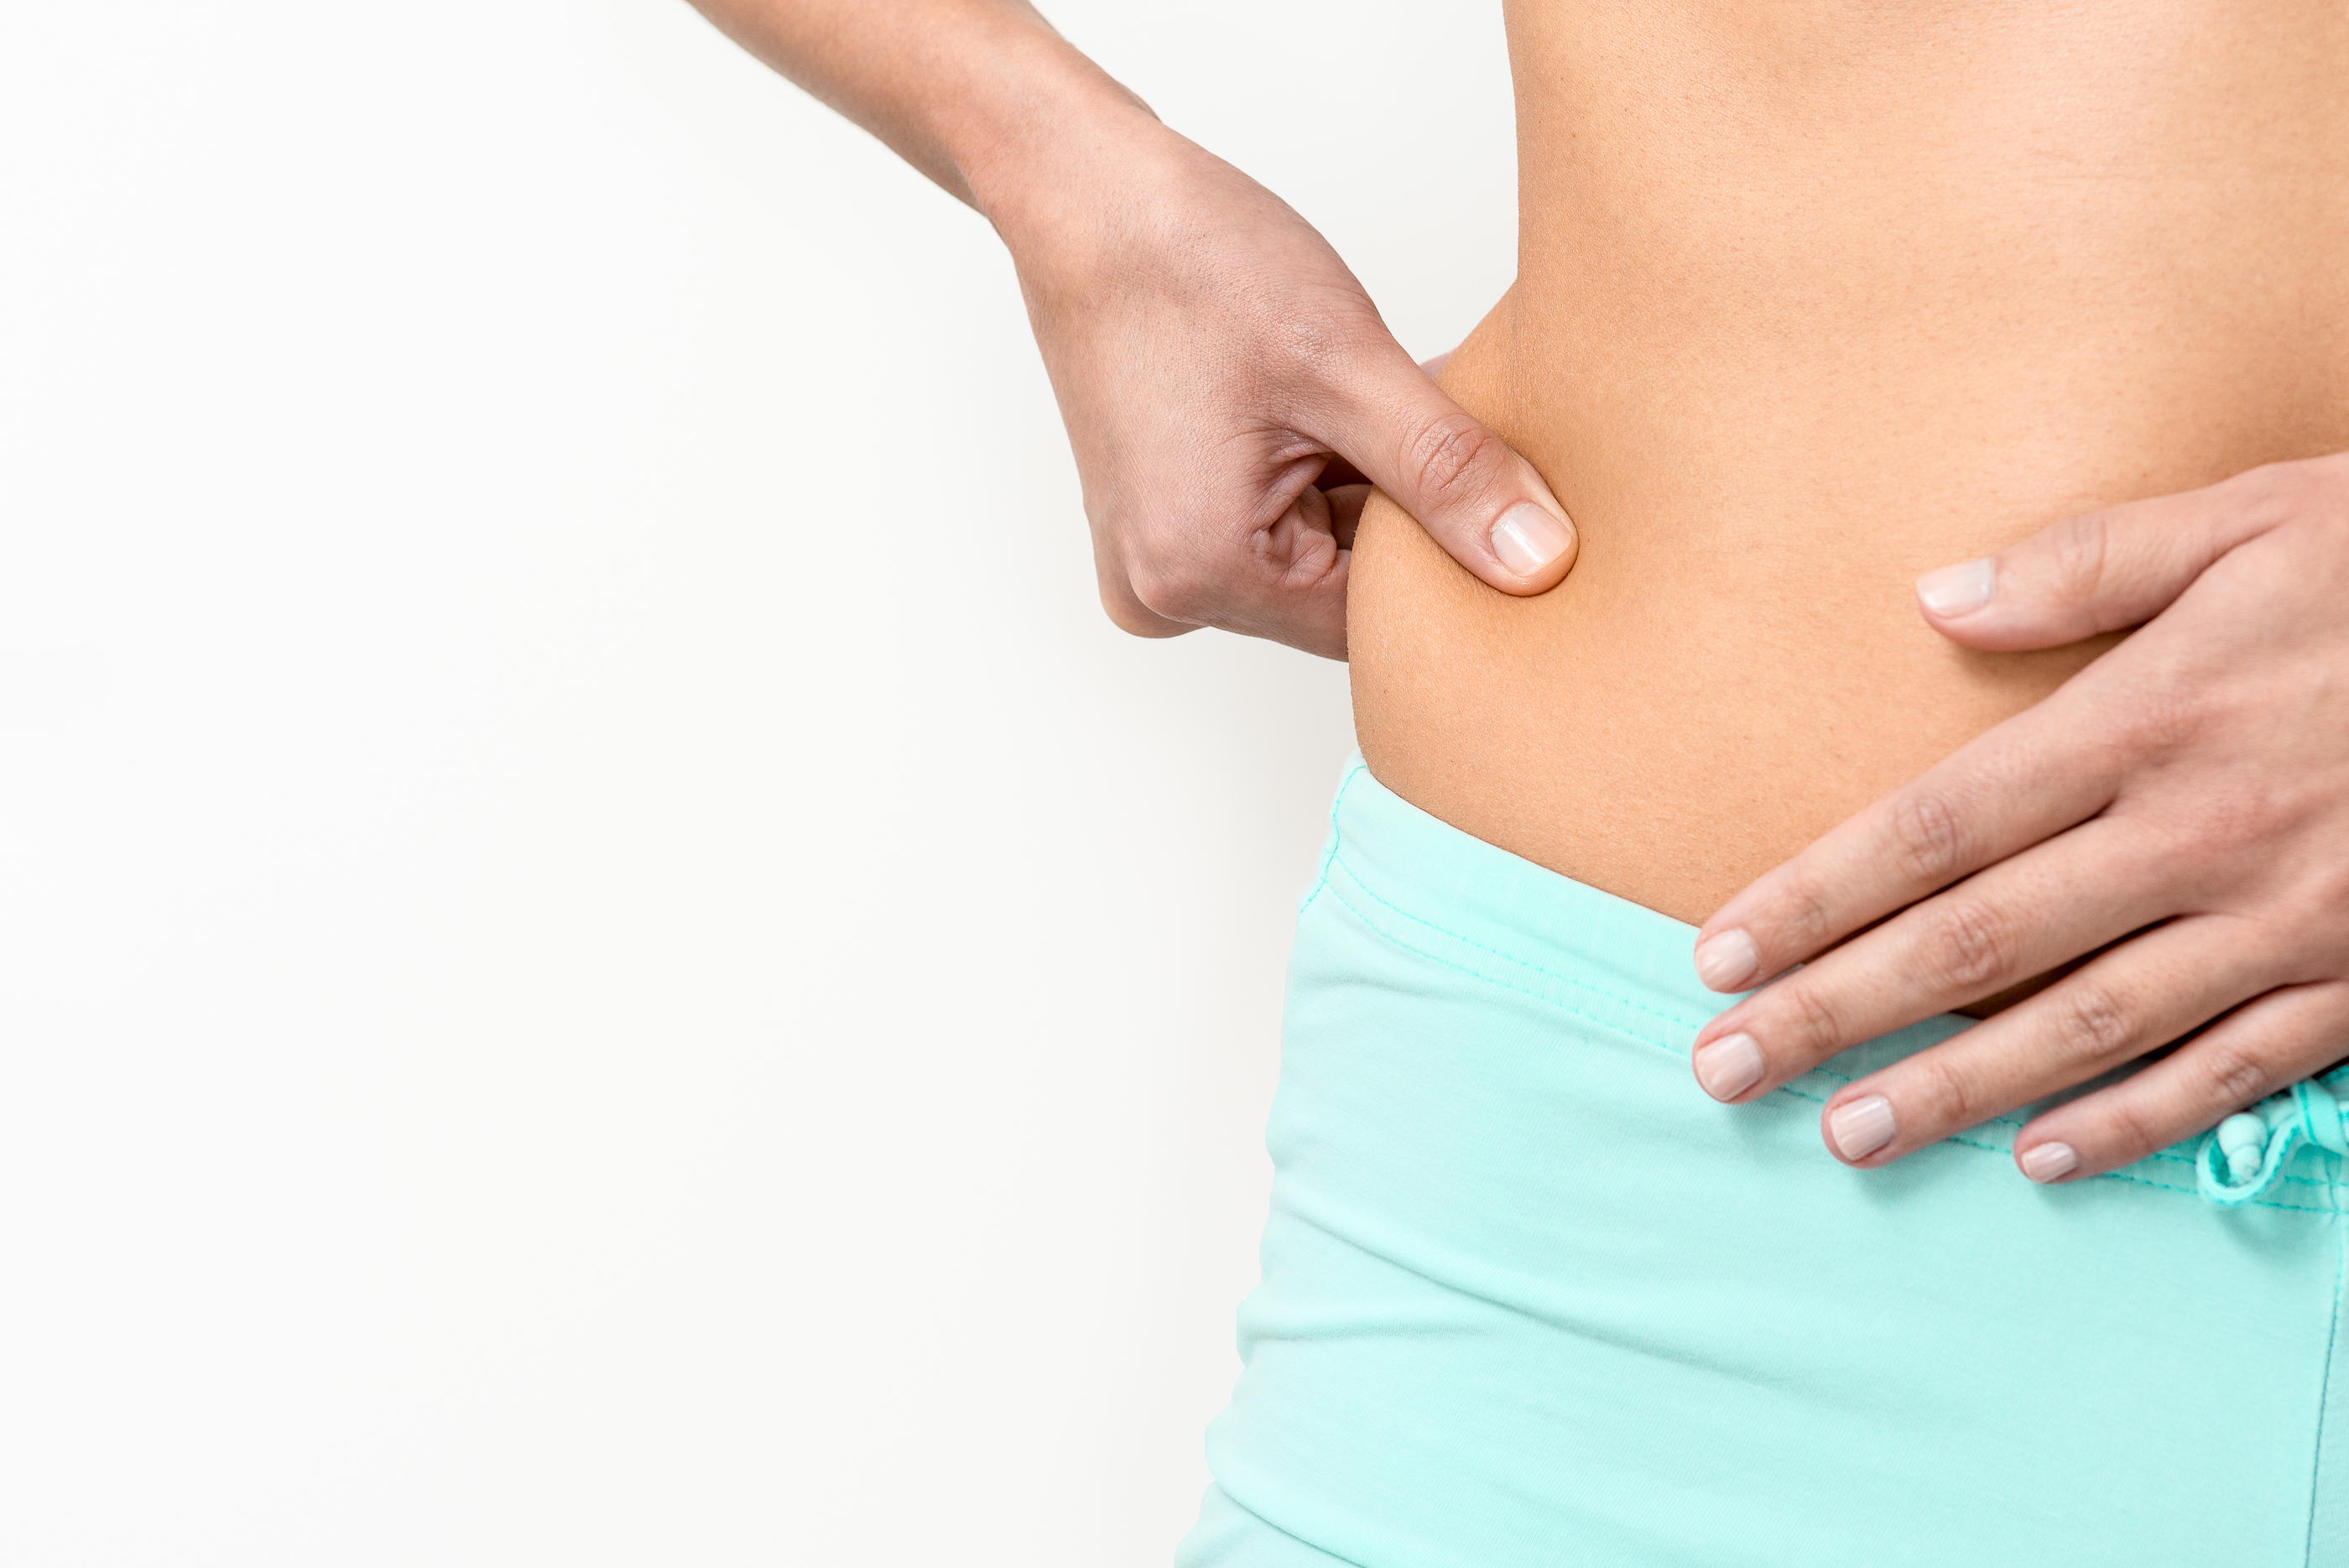 Can you get CoolSculpting for love handles?